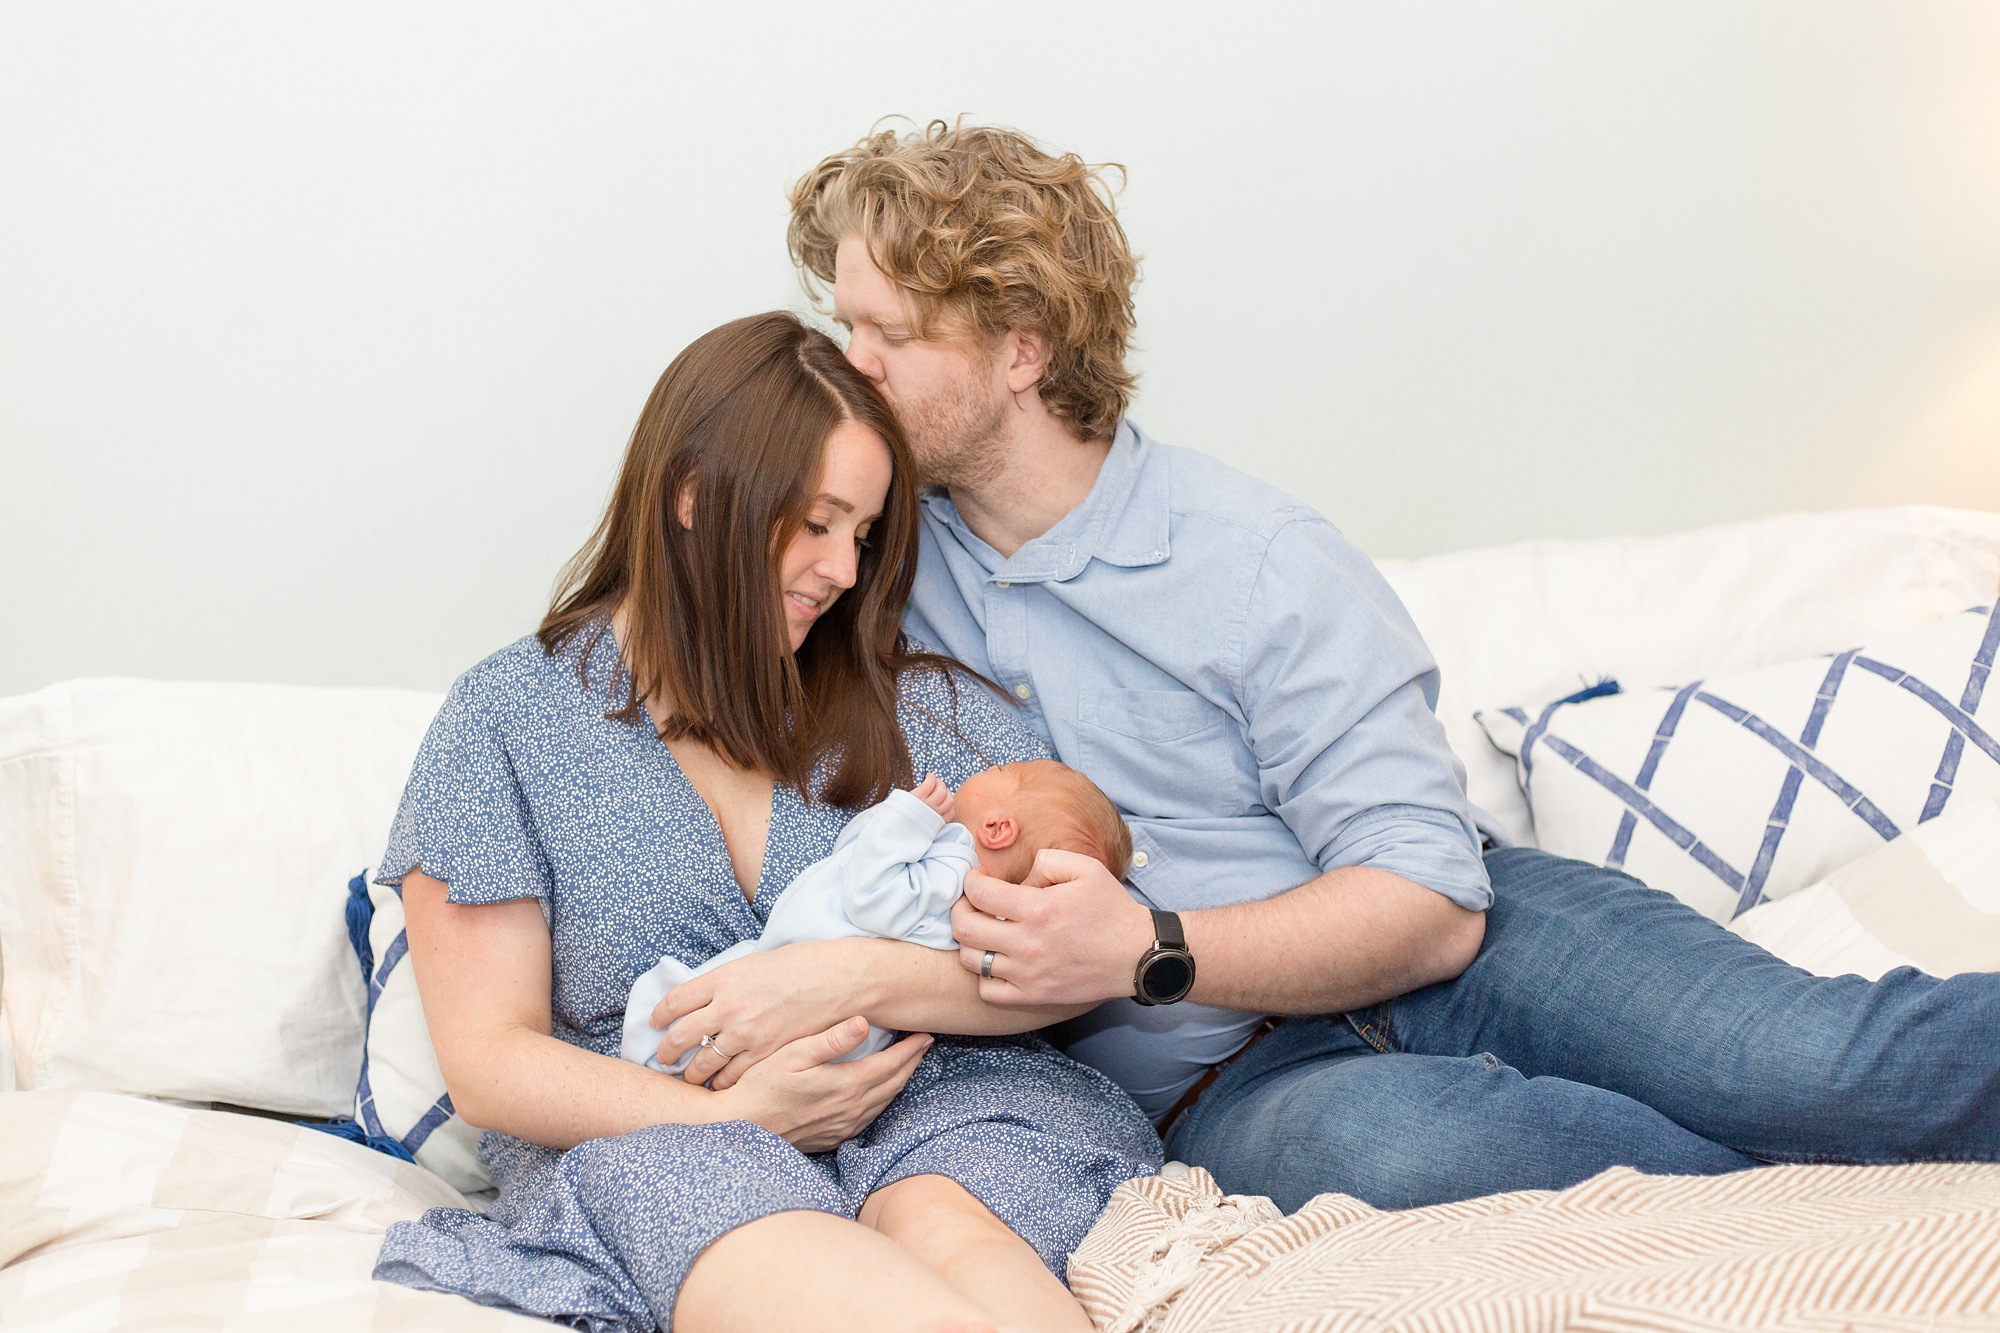 husband kisses wife's forehand while cuddling baby boy